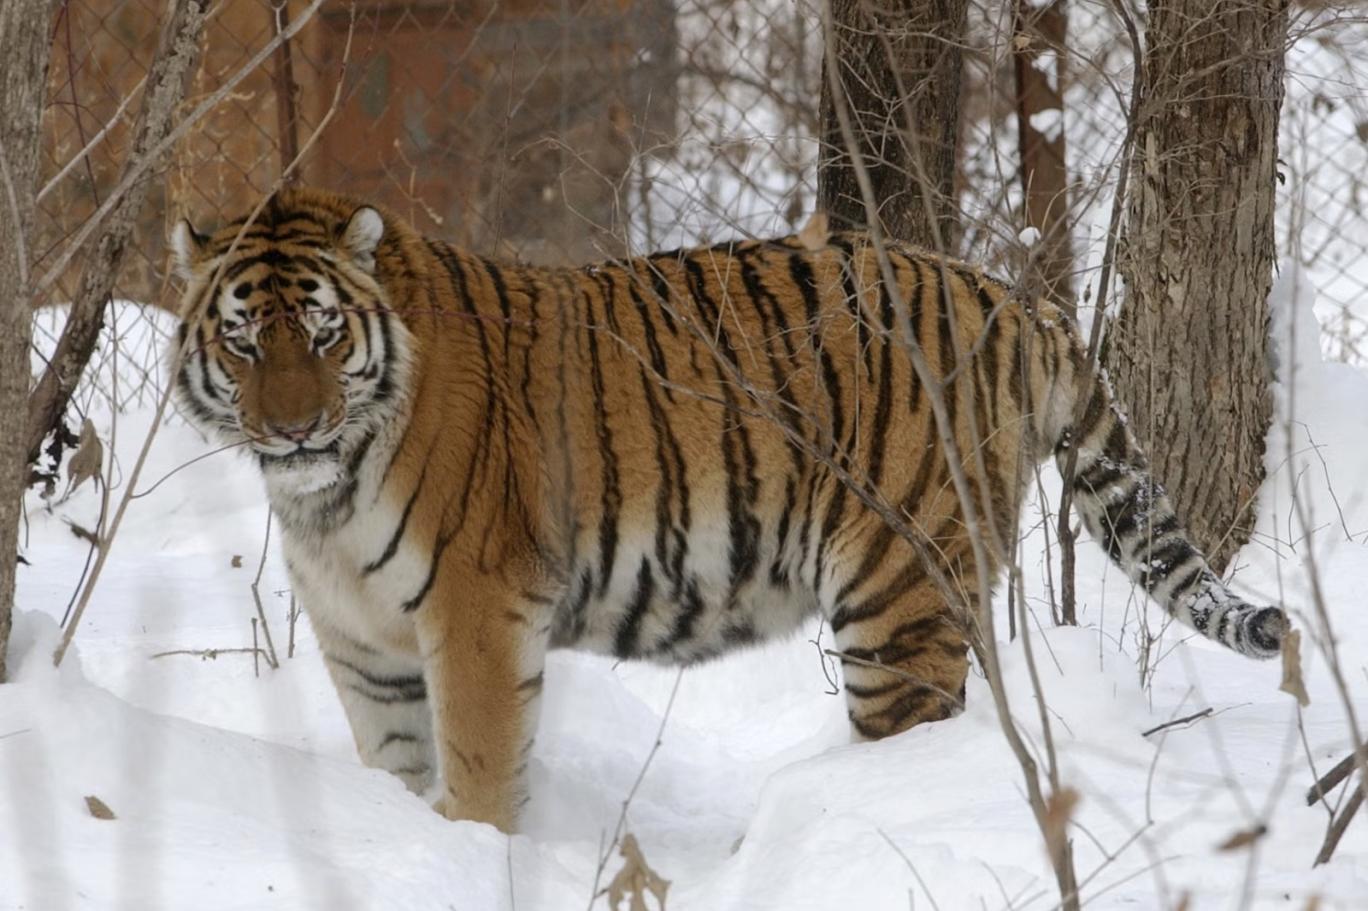 Lutiy, an endangered Amur tiger, walks around his cage at the Wild Animal Rehabilitation Center in the Sikhote-Alin Nature Monument in Russia on Monday, Dec. 5, 2005 (AP/Burt Herman)